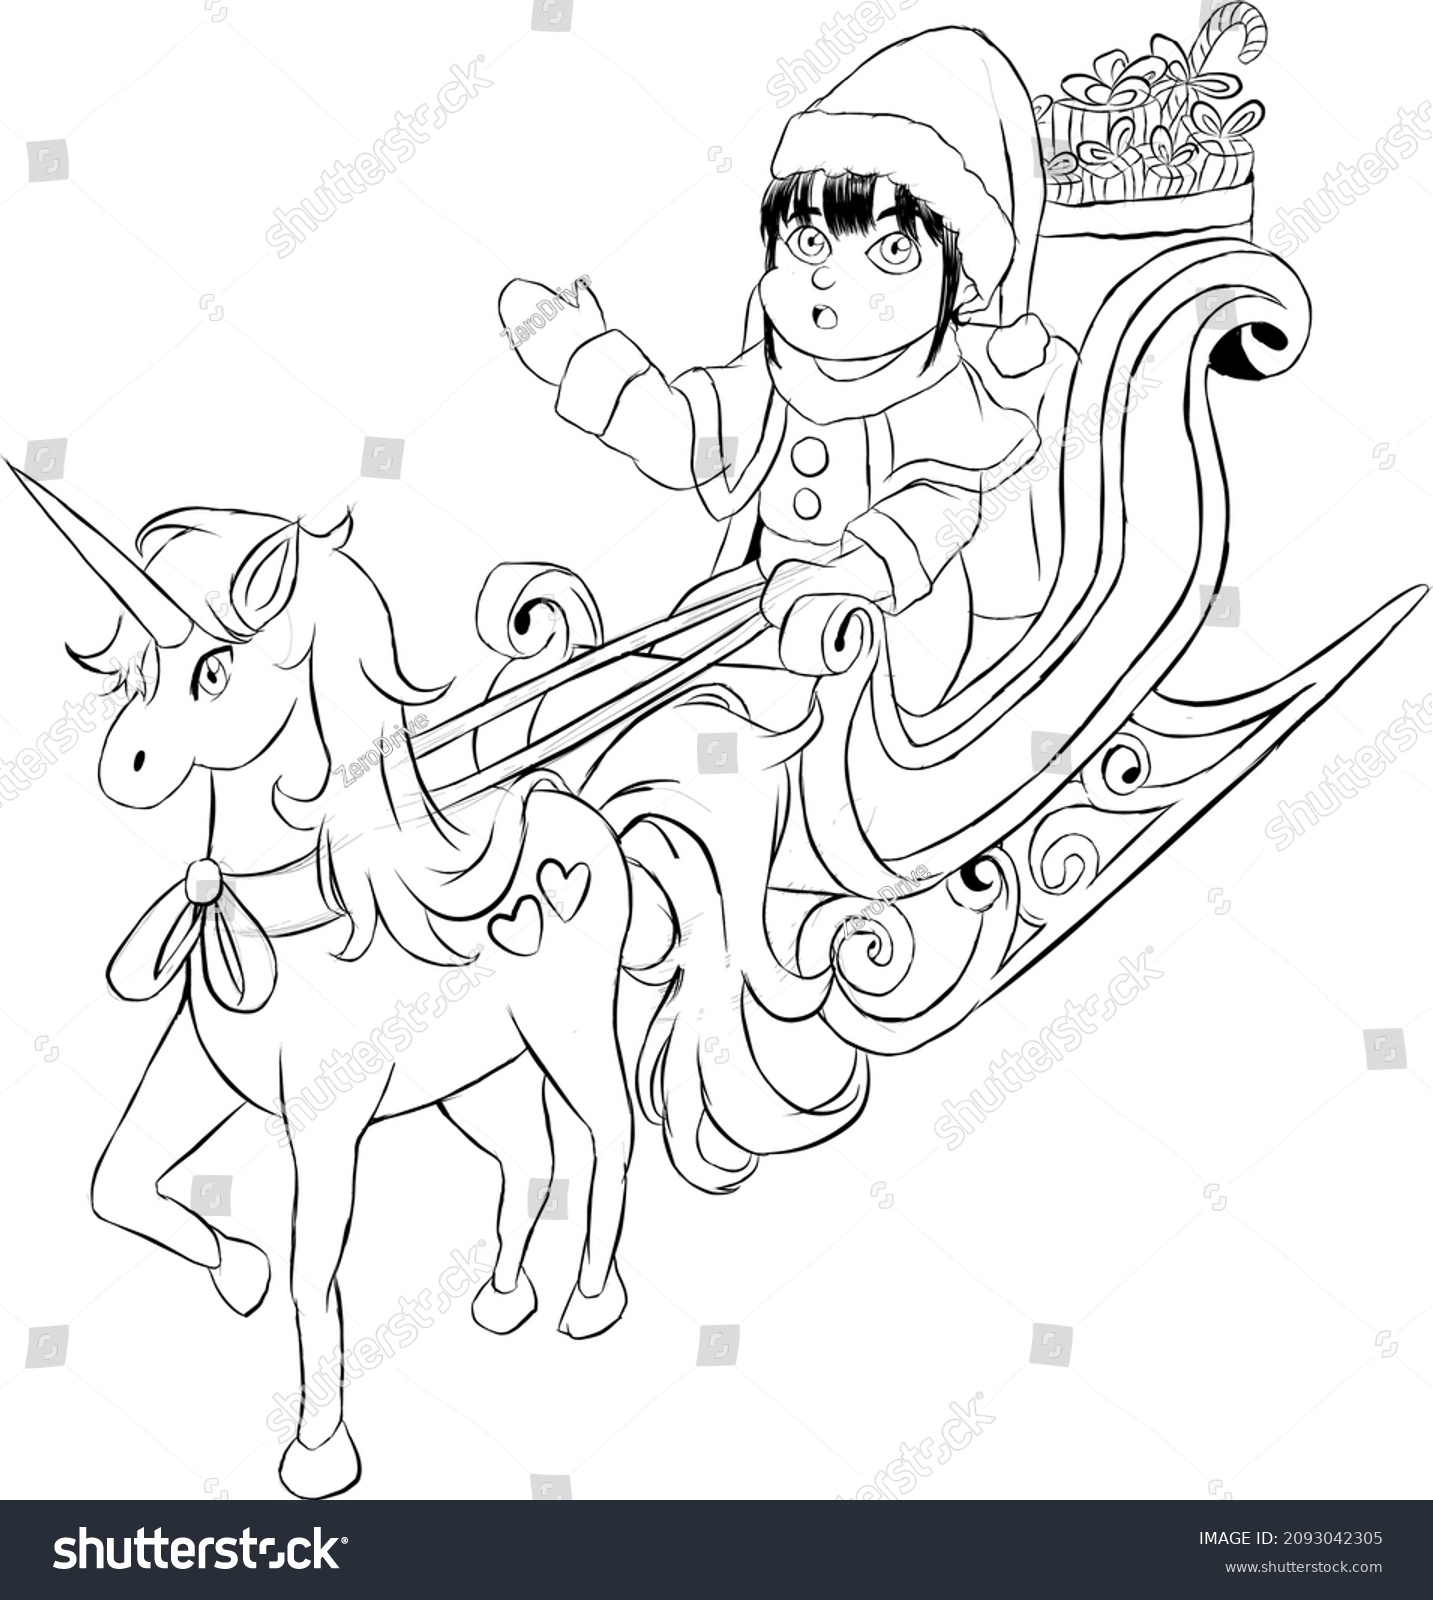 SVG of Cute Girl Becomes Santa Claus On Christmas While Riding Santa's Train Unicorn Little Pony , Black and white line vector Cartoon illustration For Coloring book page svg